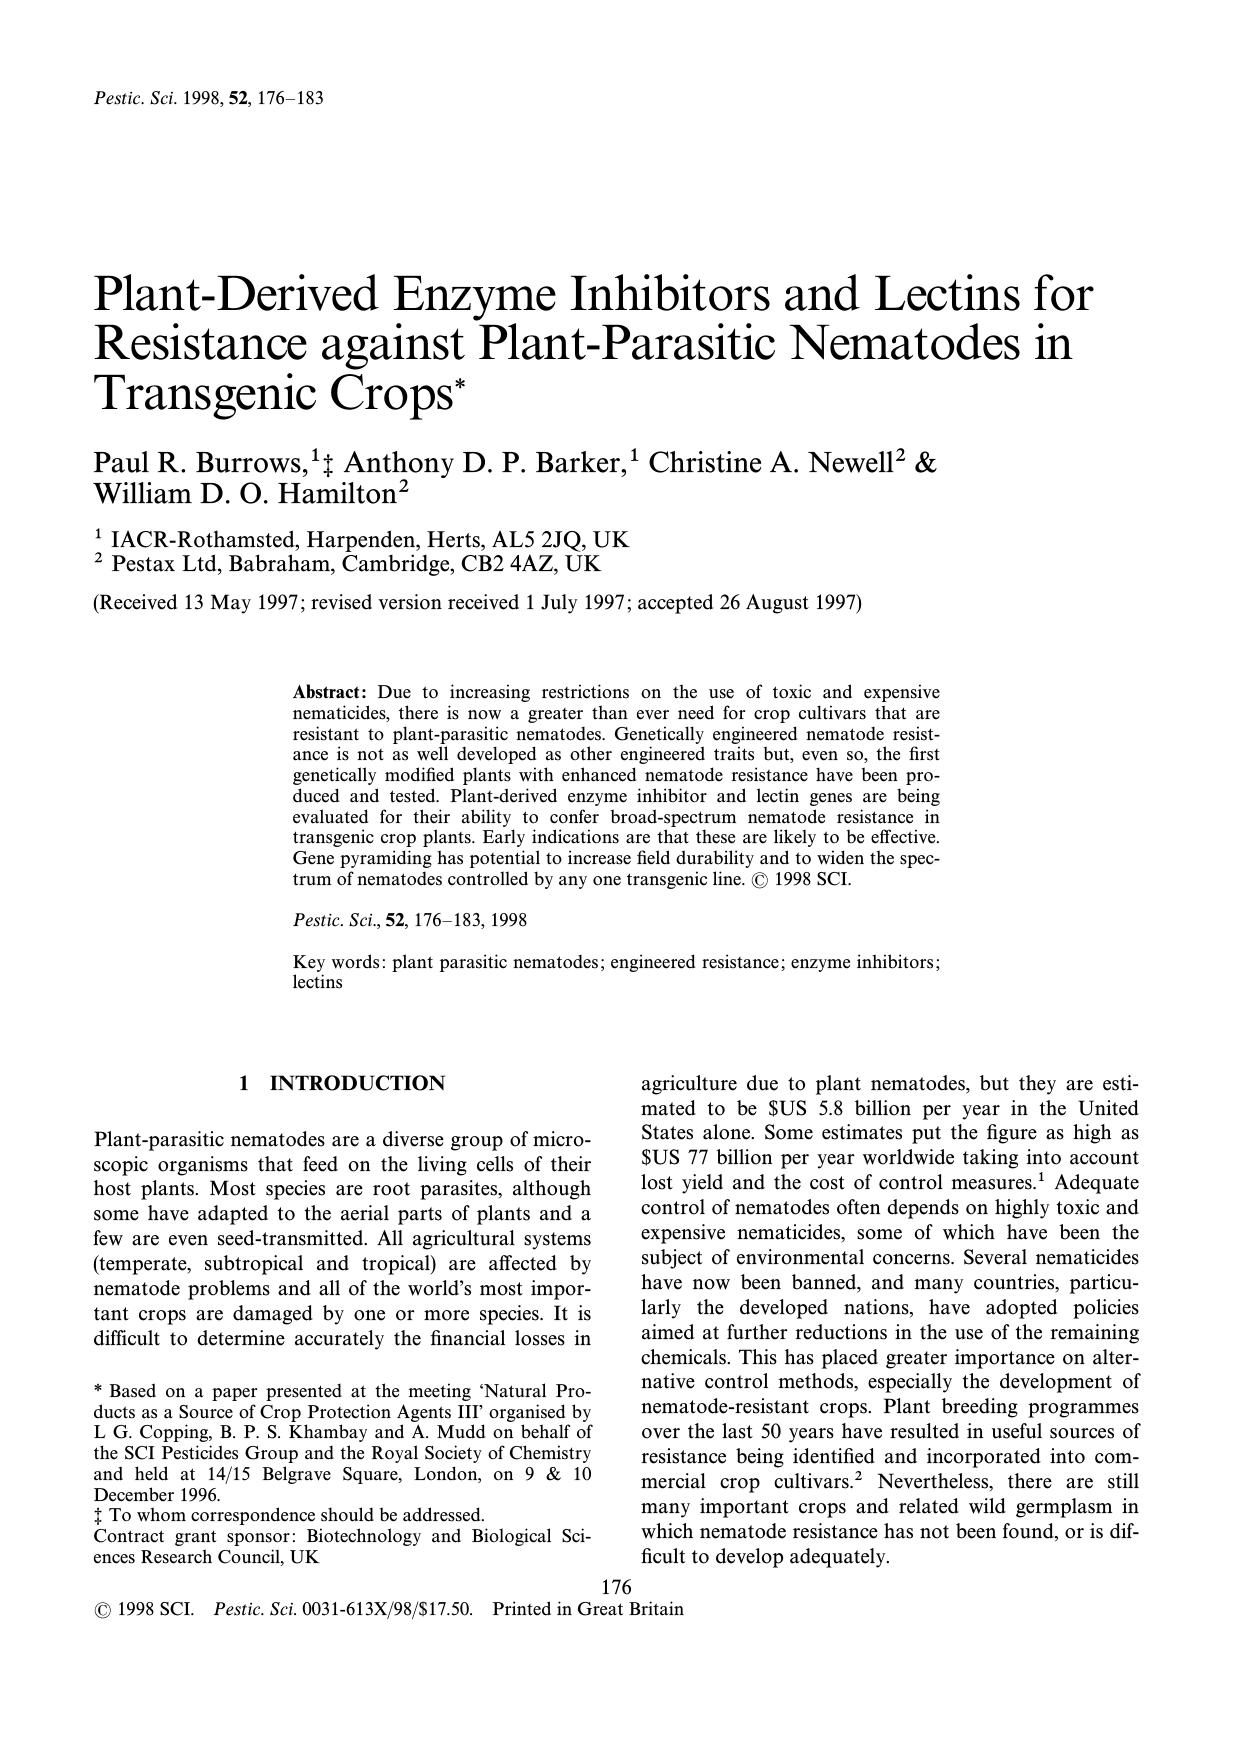 Plant-Derived Enzyme Inhibitors and Lectins for Resistance against Plant-Parasitic Nematodes in Transgenic Crops* by Burrows Barker Newell Hamilton